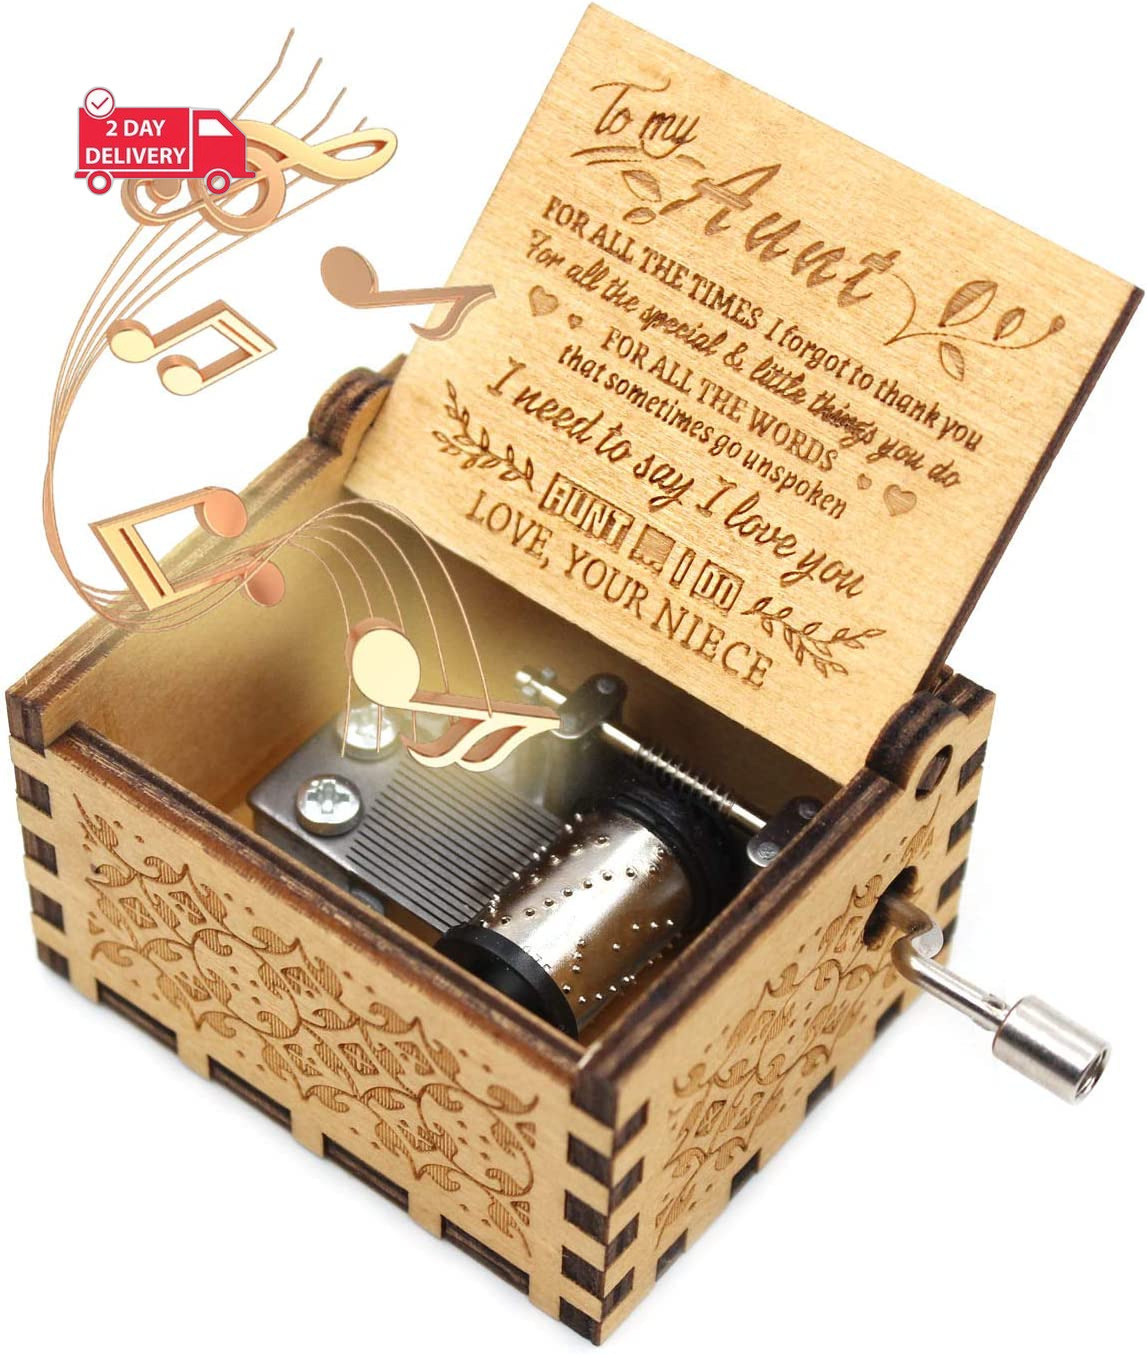 Wooden Music Box - You Are My Sunshine Music Box, from Niece to Aunt, Gifts for